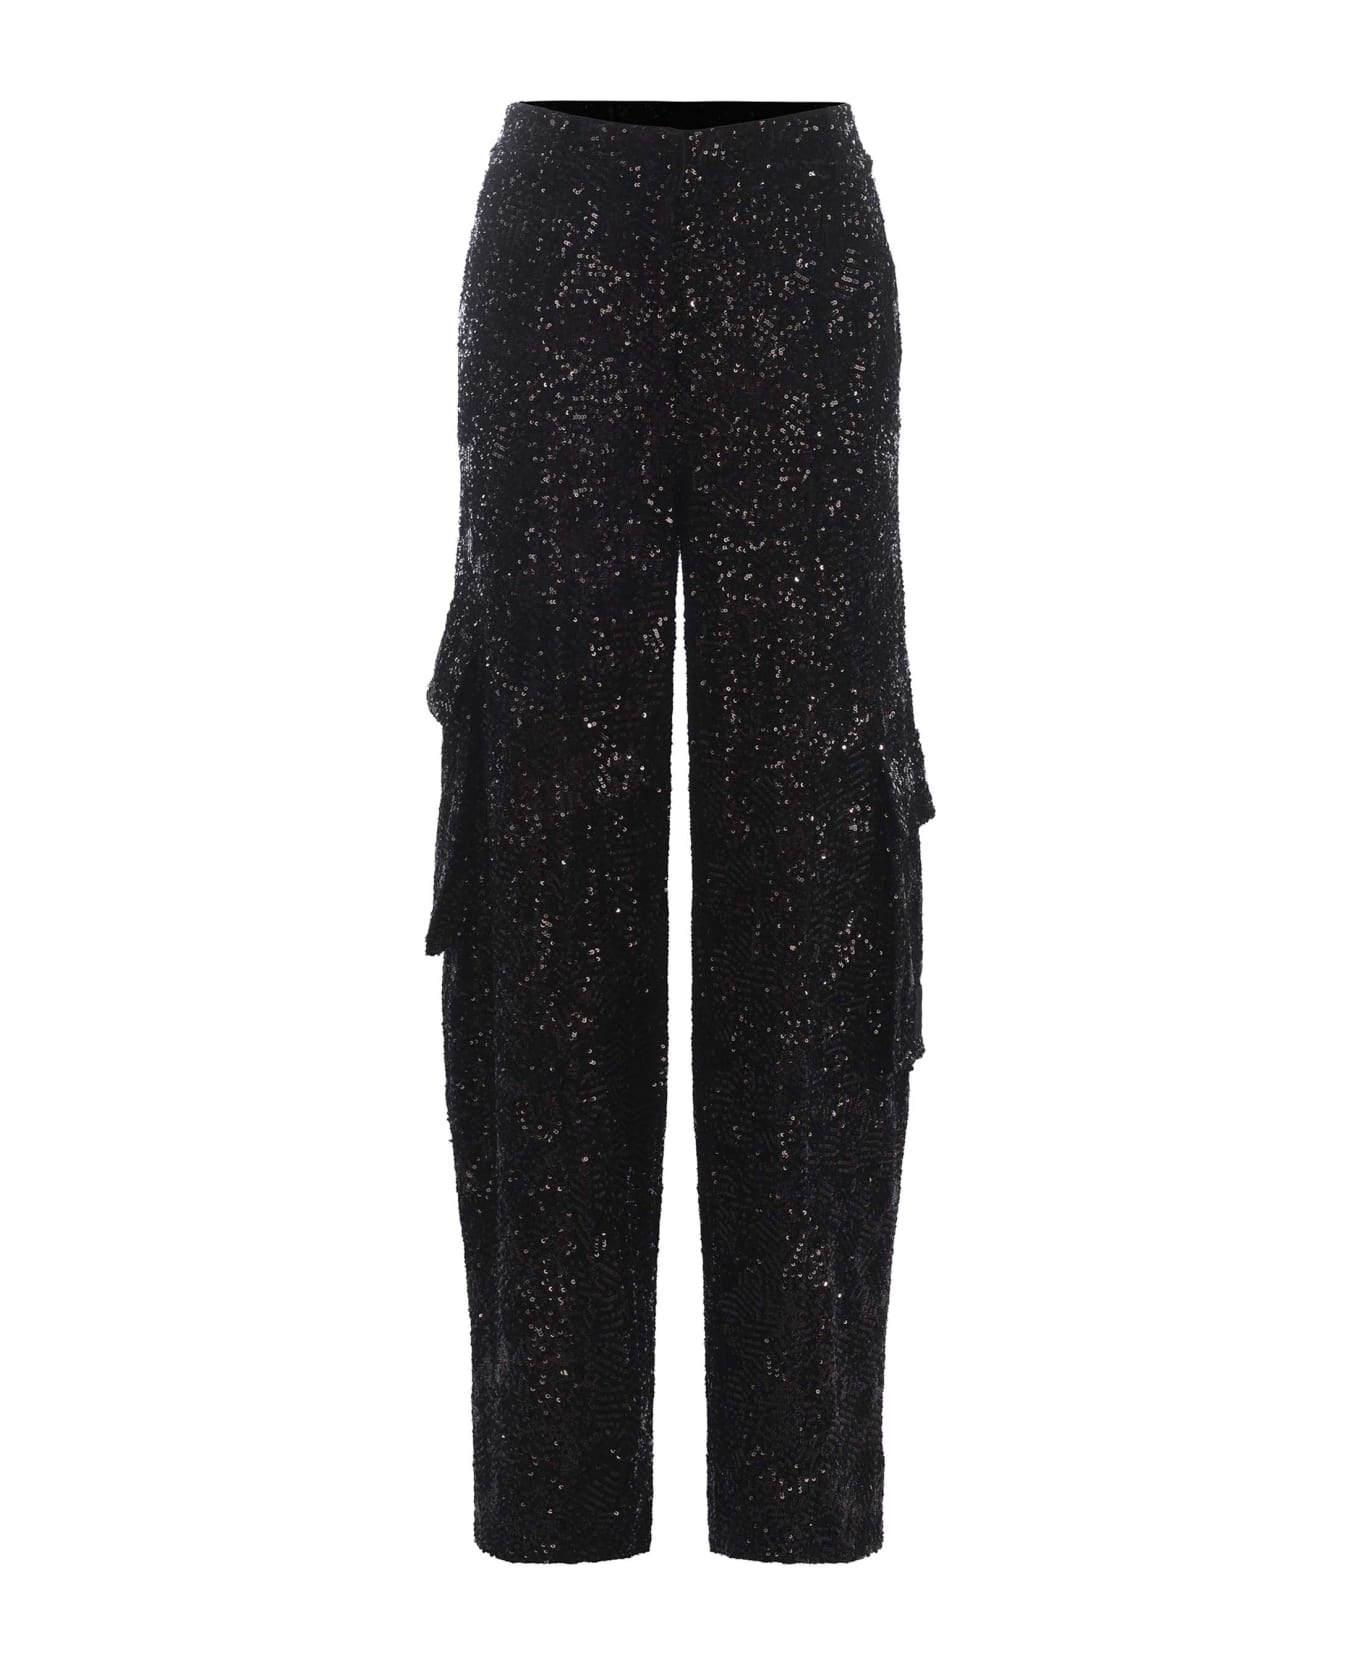 Rotate by Birger Christensen Trousers Rotate Made With Sequins - Nero